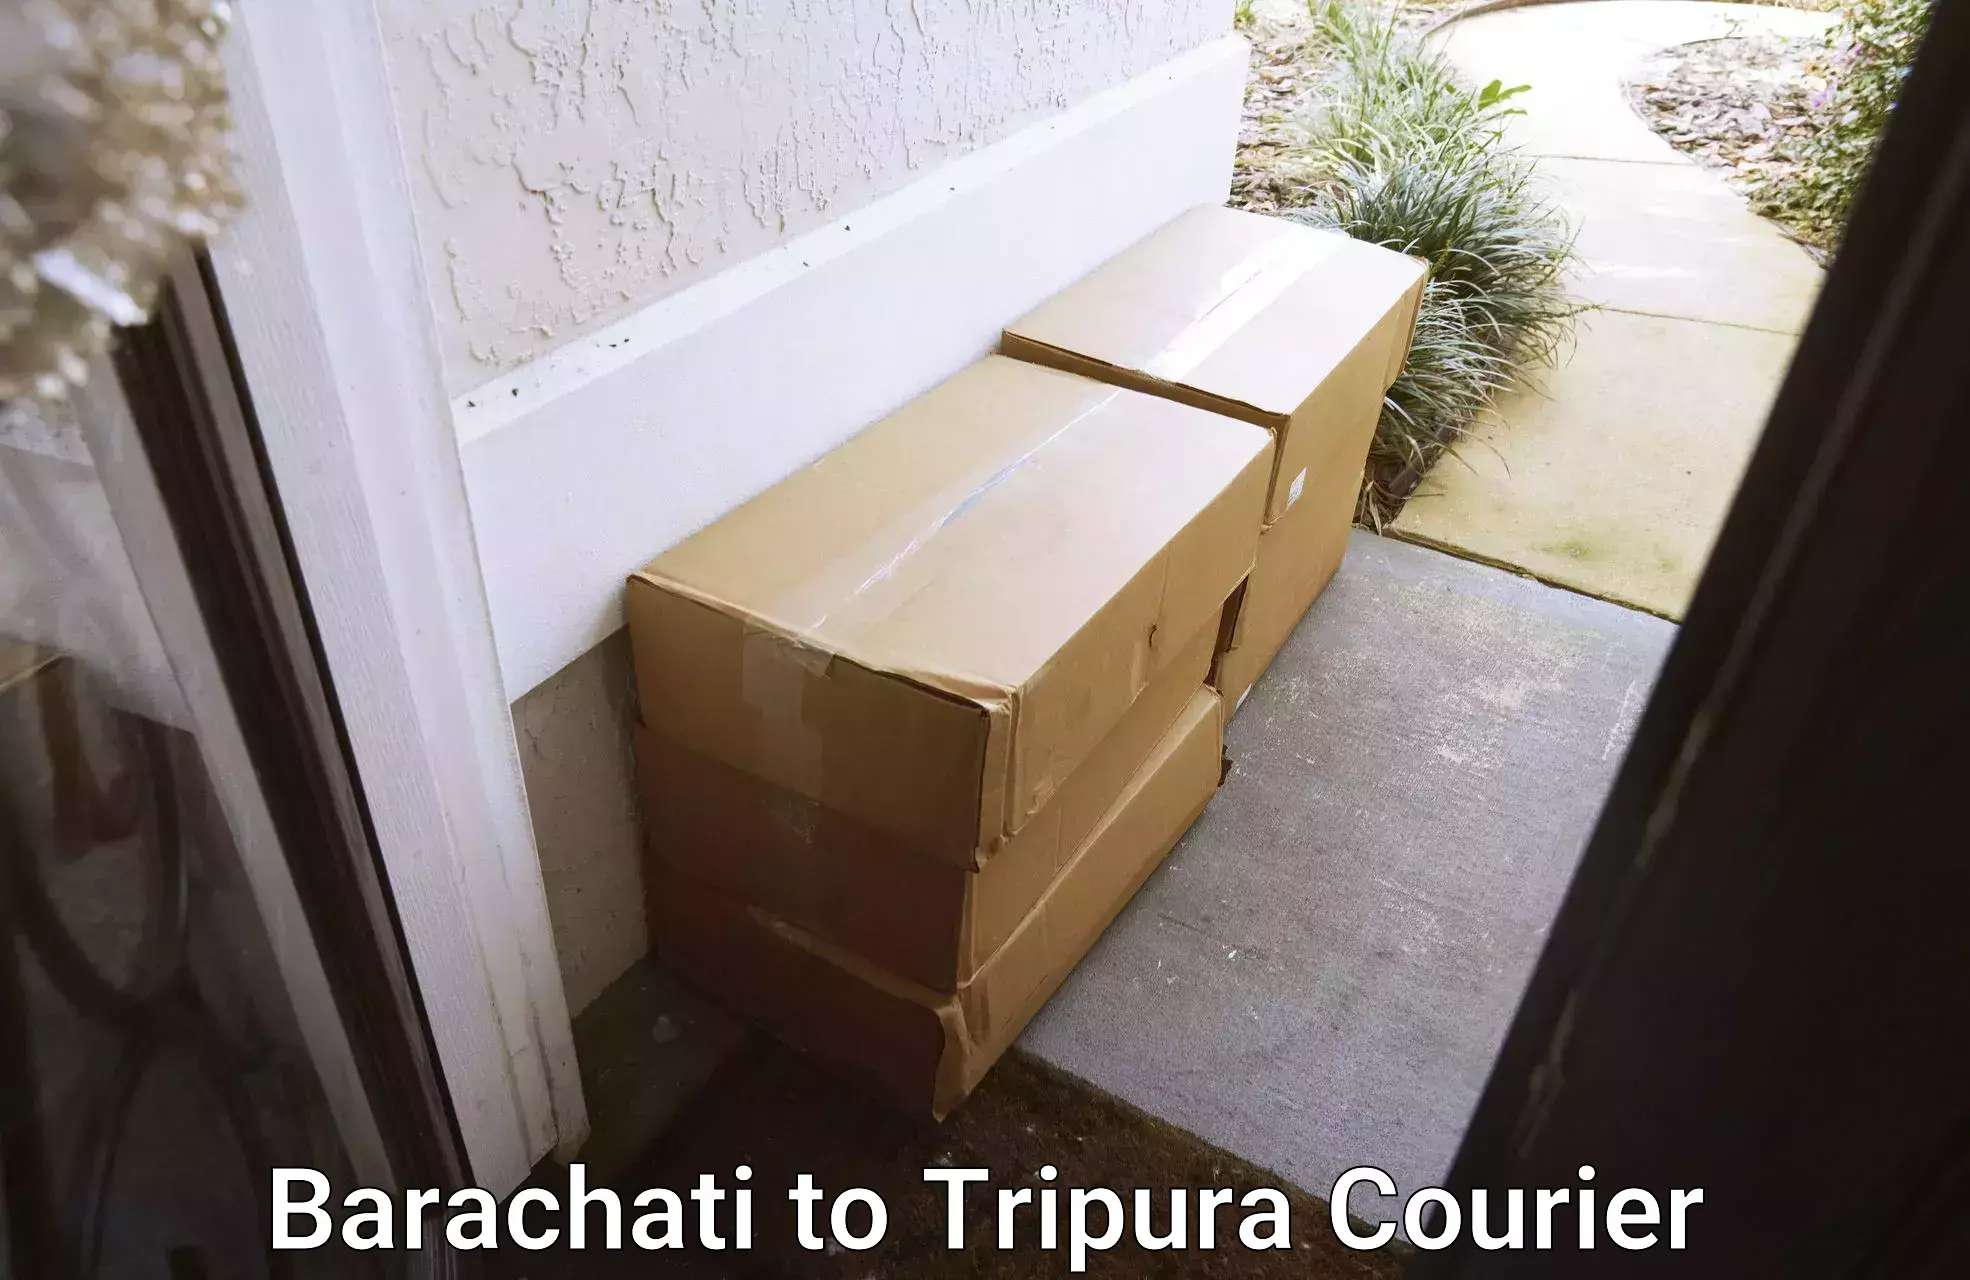 Trusted relocation experts Barachati to Tripura